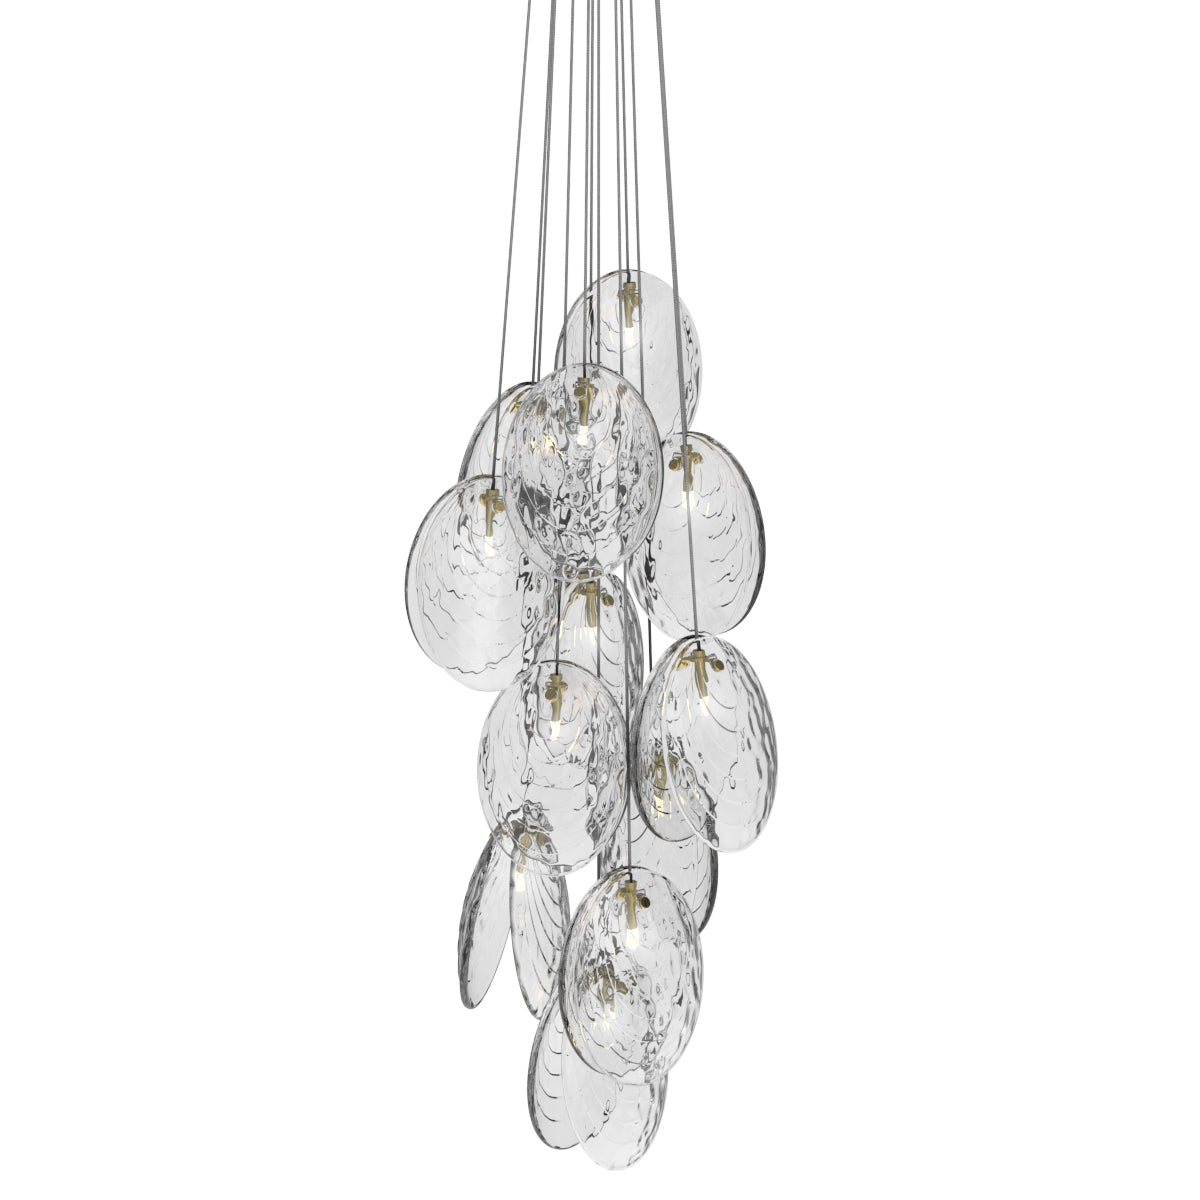 BOMMA - MUSSELS MULTI LIGHT PENDANT - from $8,060.00